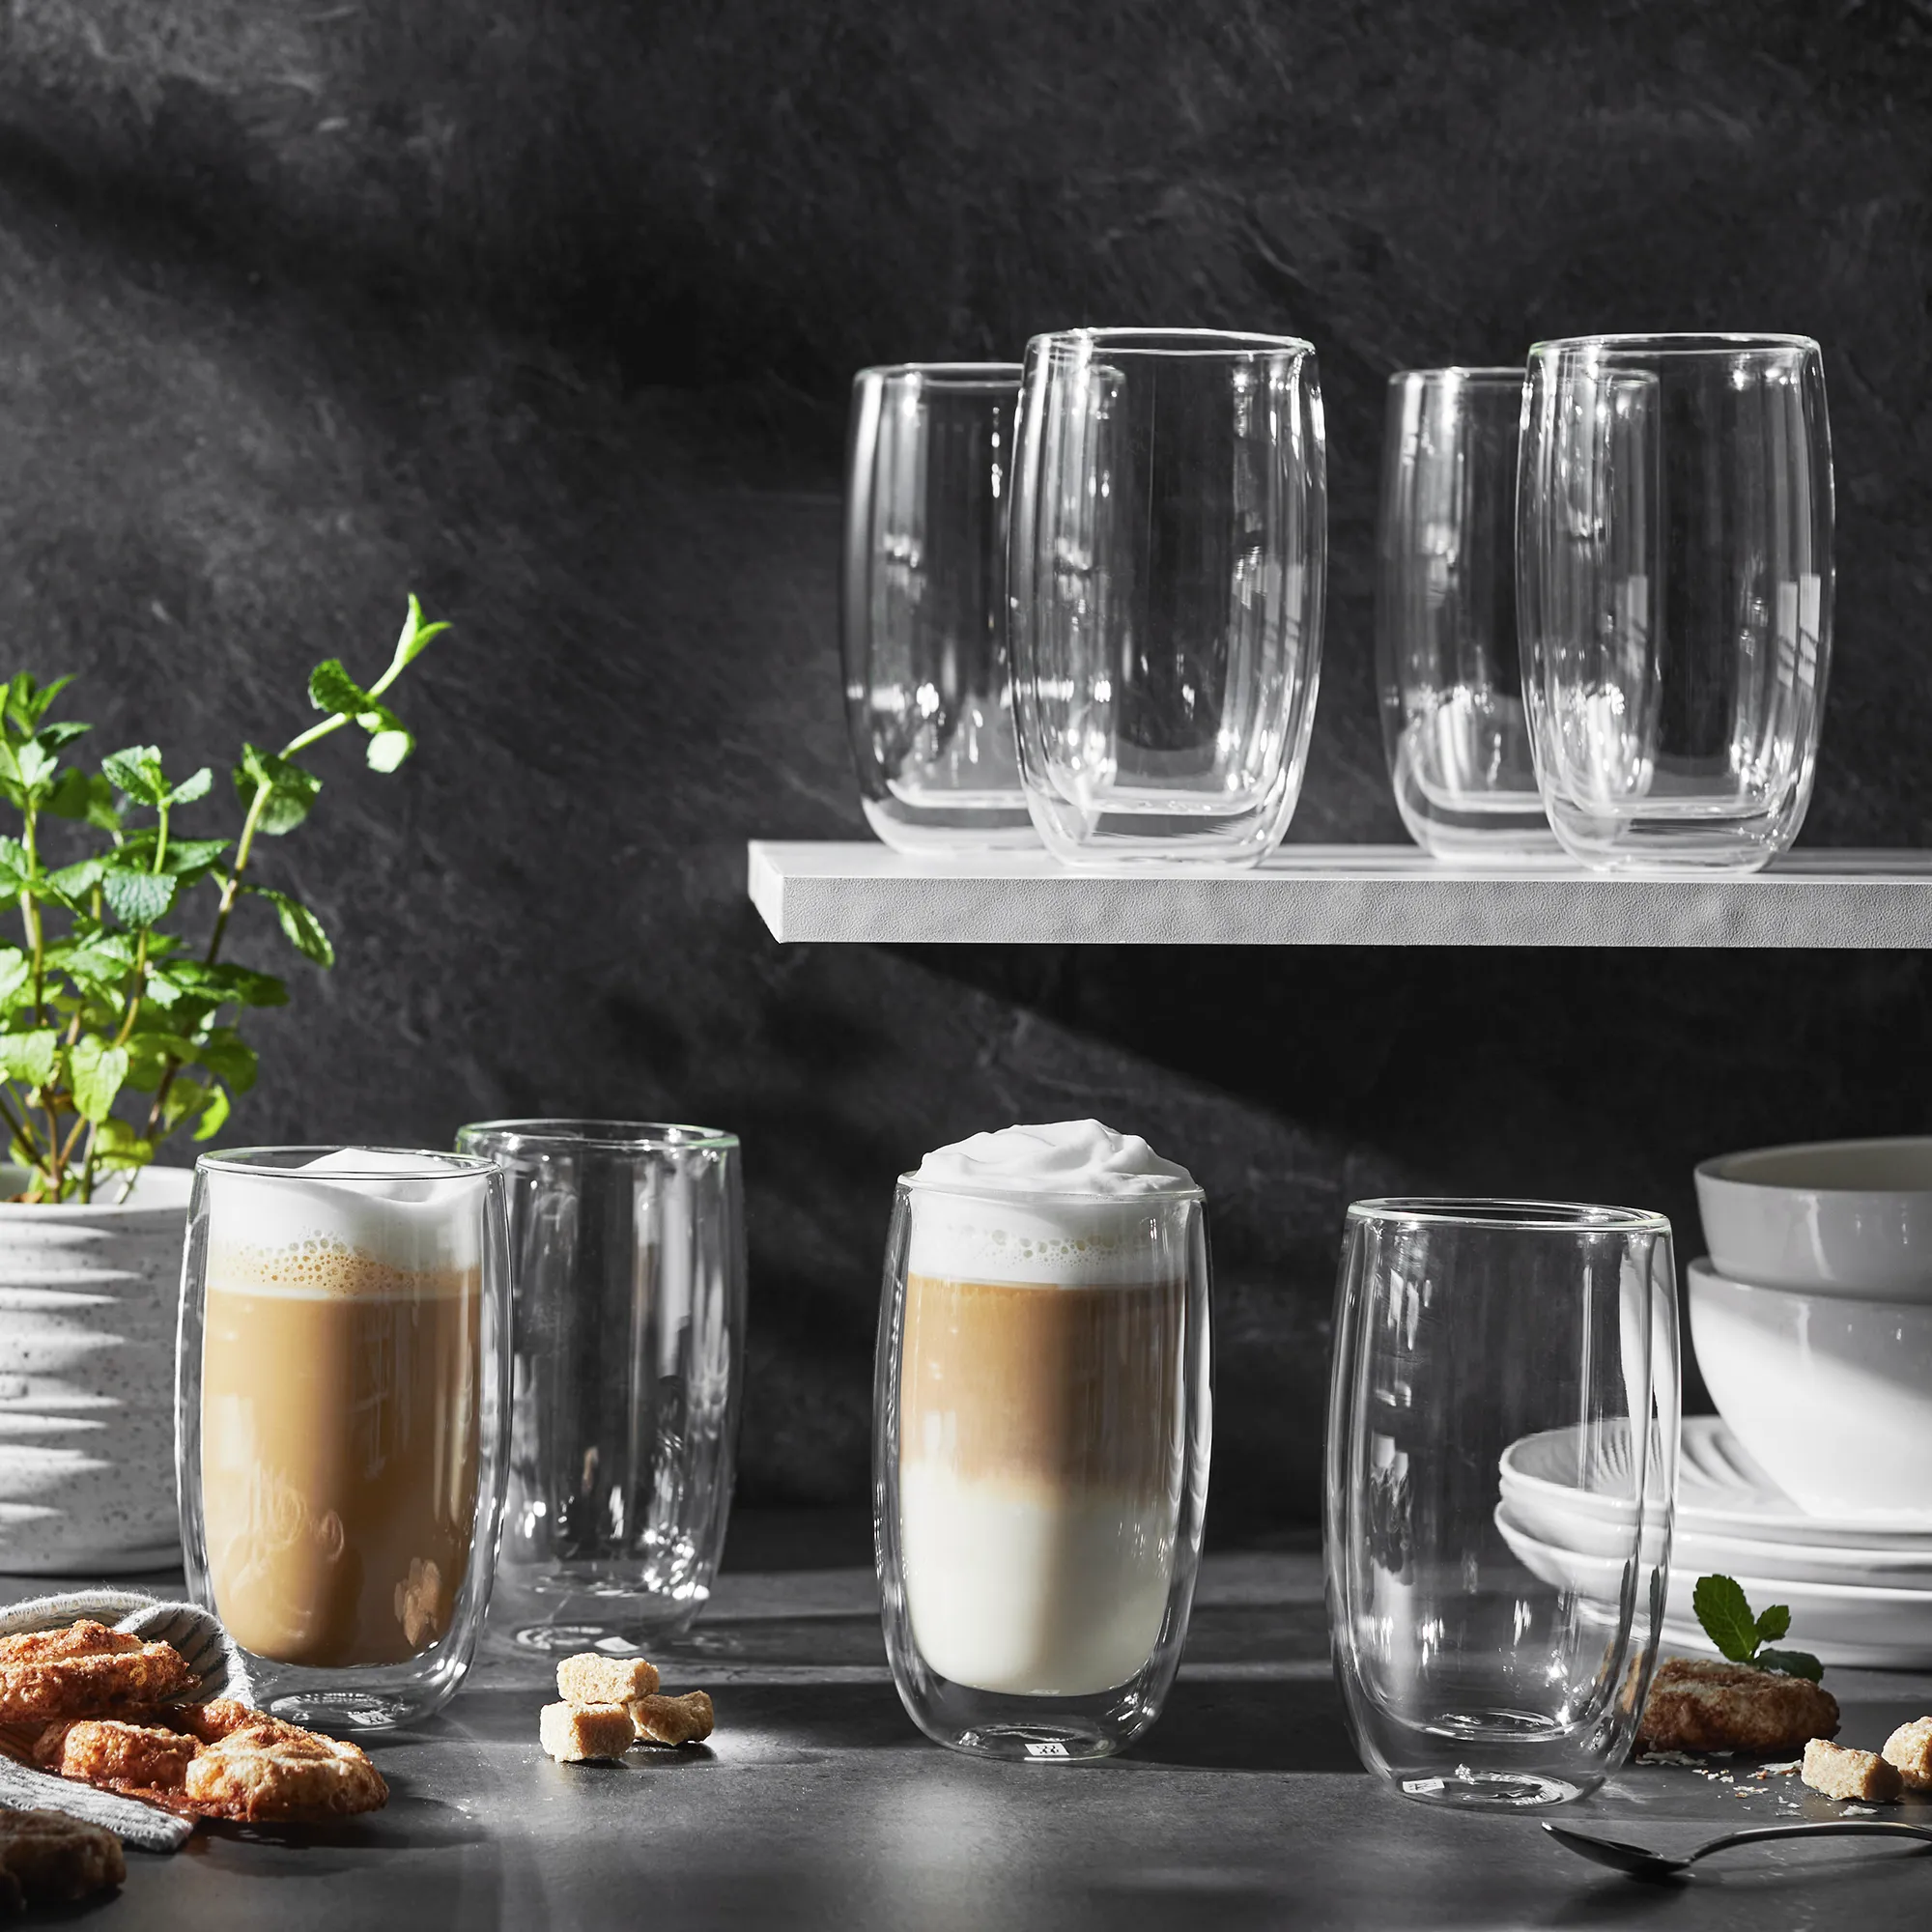 https://www.homethreads.com/files/zwilling/1019466-zwilling-sorrento-8-pc-double-wall-glass-latte-cup-set-4.webp